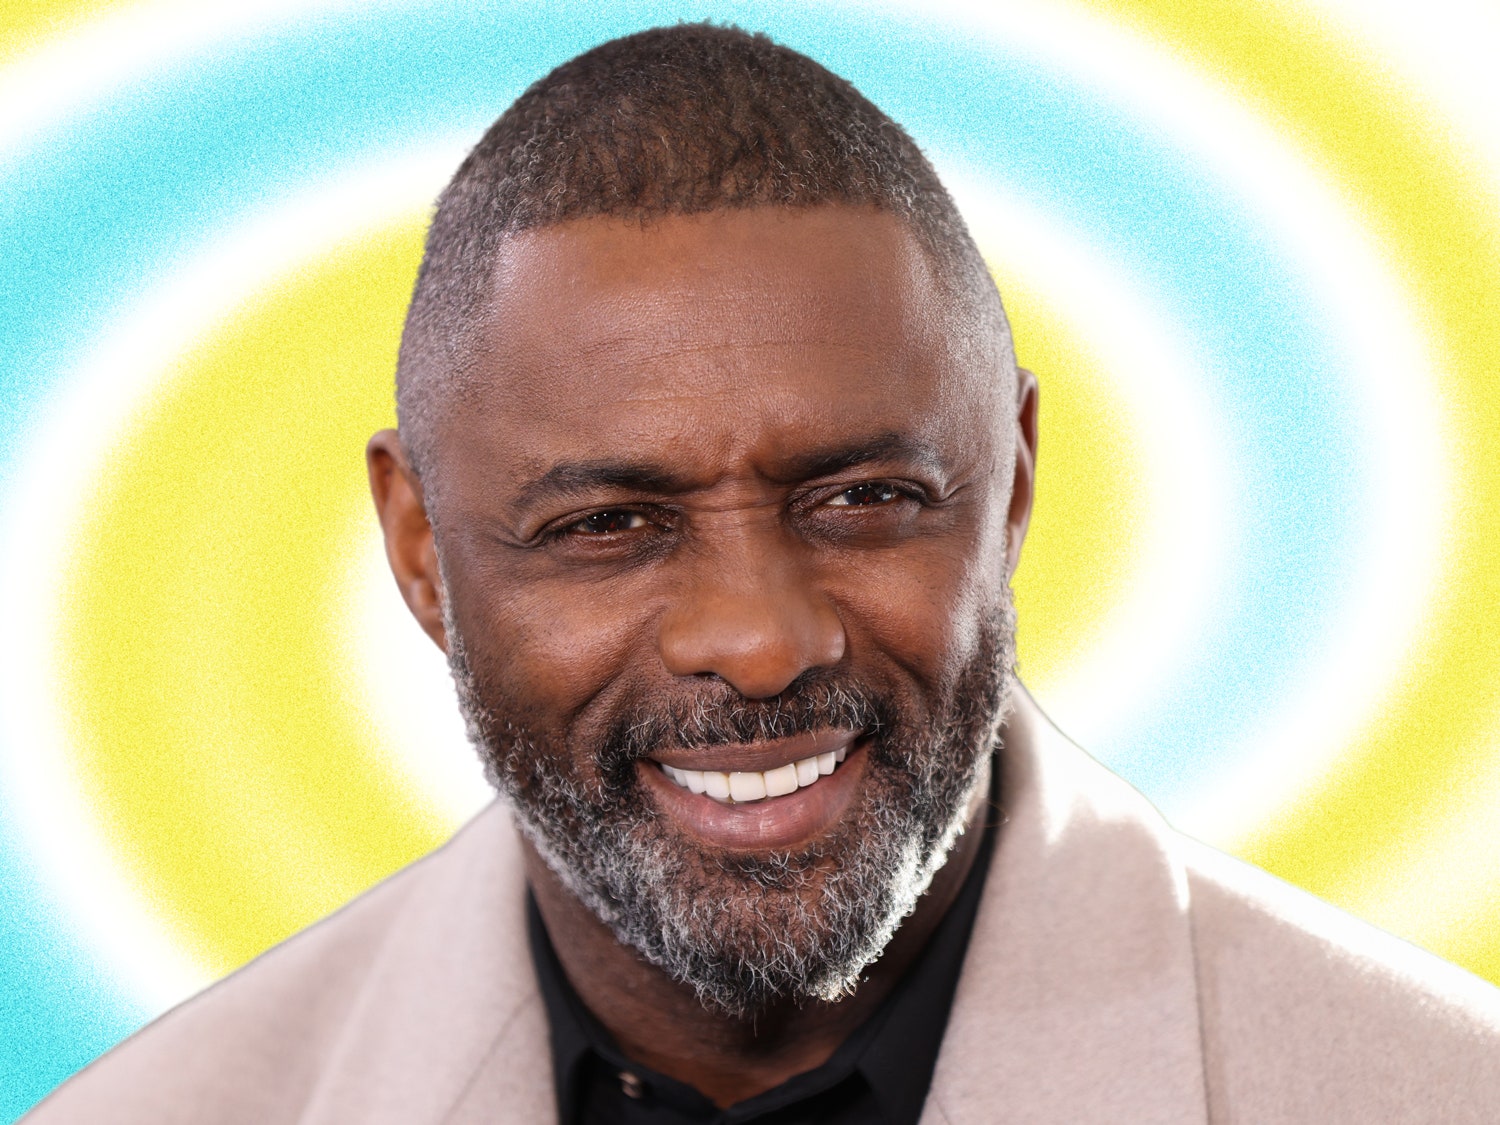 The Real Life Diet of Idris Elba, Who Only Drinks Decaf